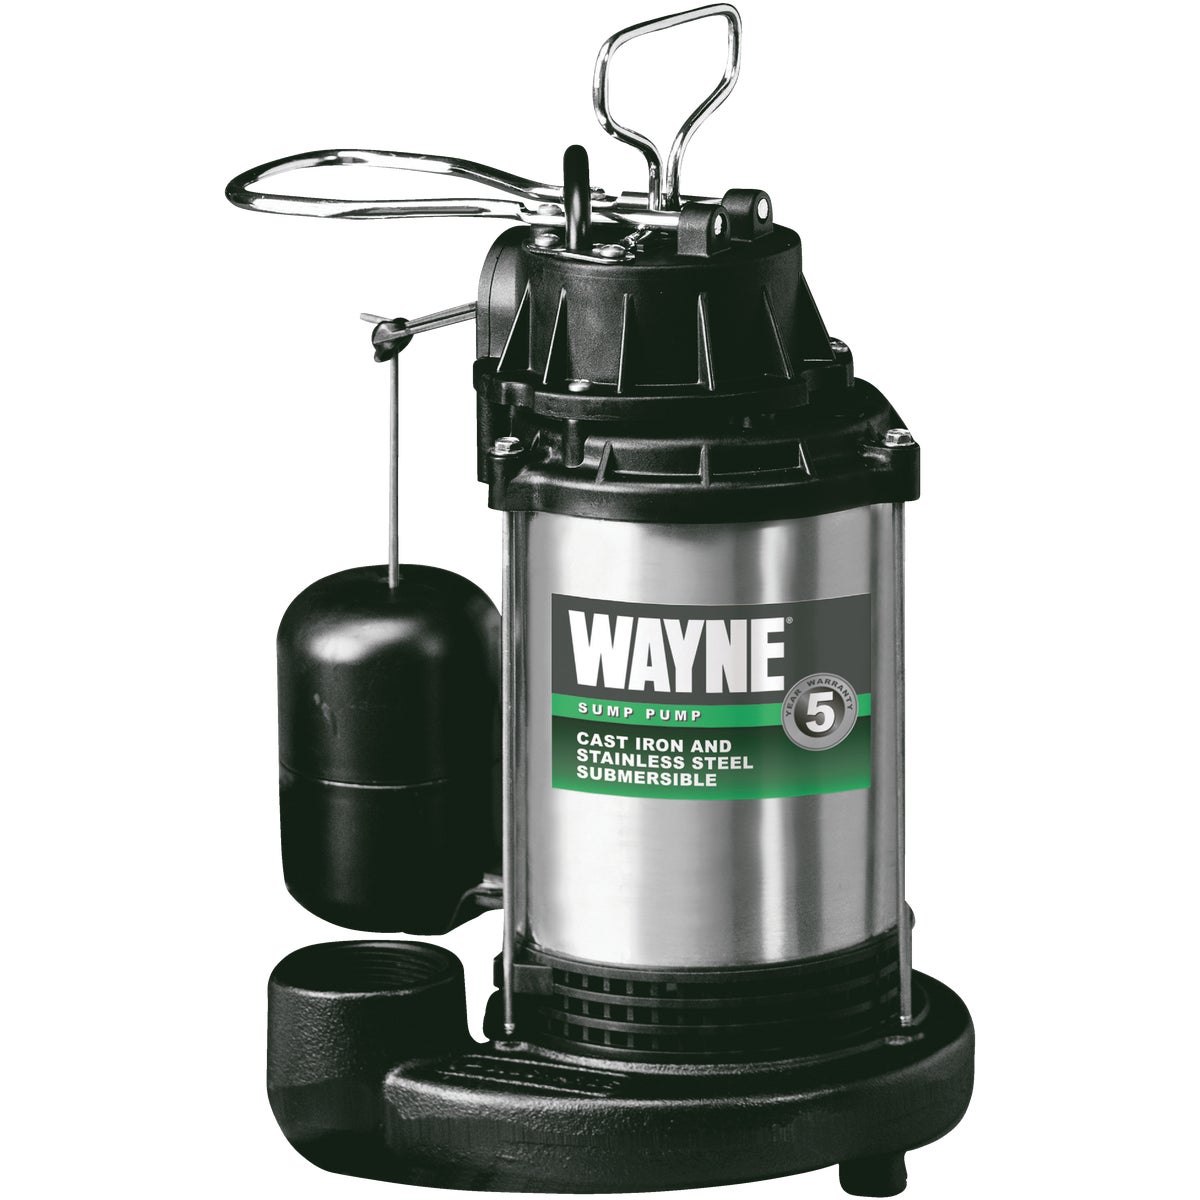 Item 406000, Pumps up to 4600 GPH at 0'. Cast-iron submersible sump pump.